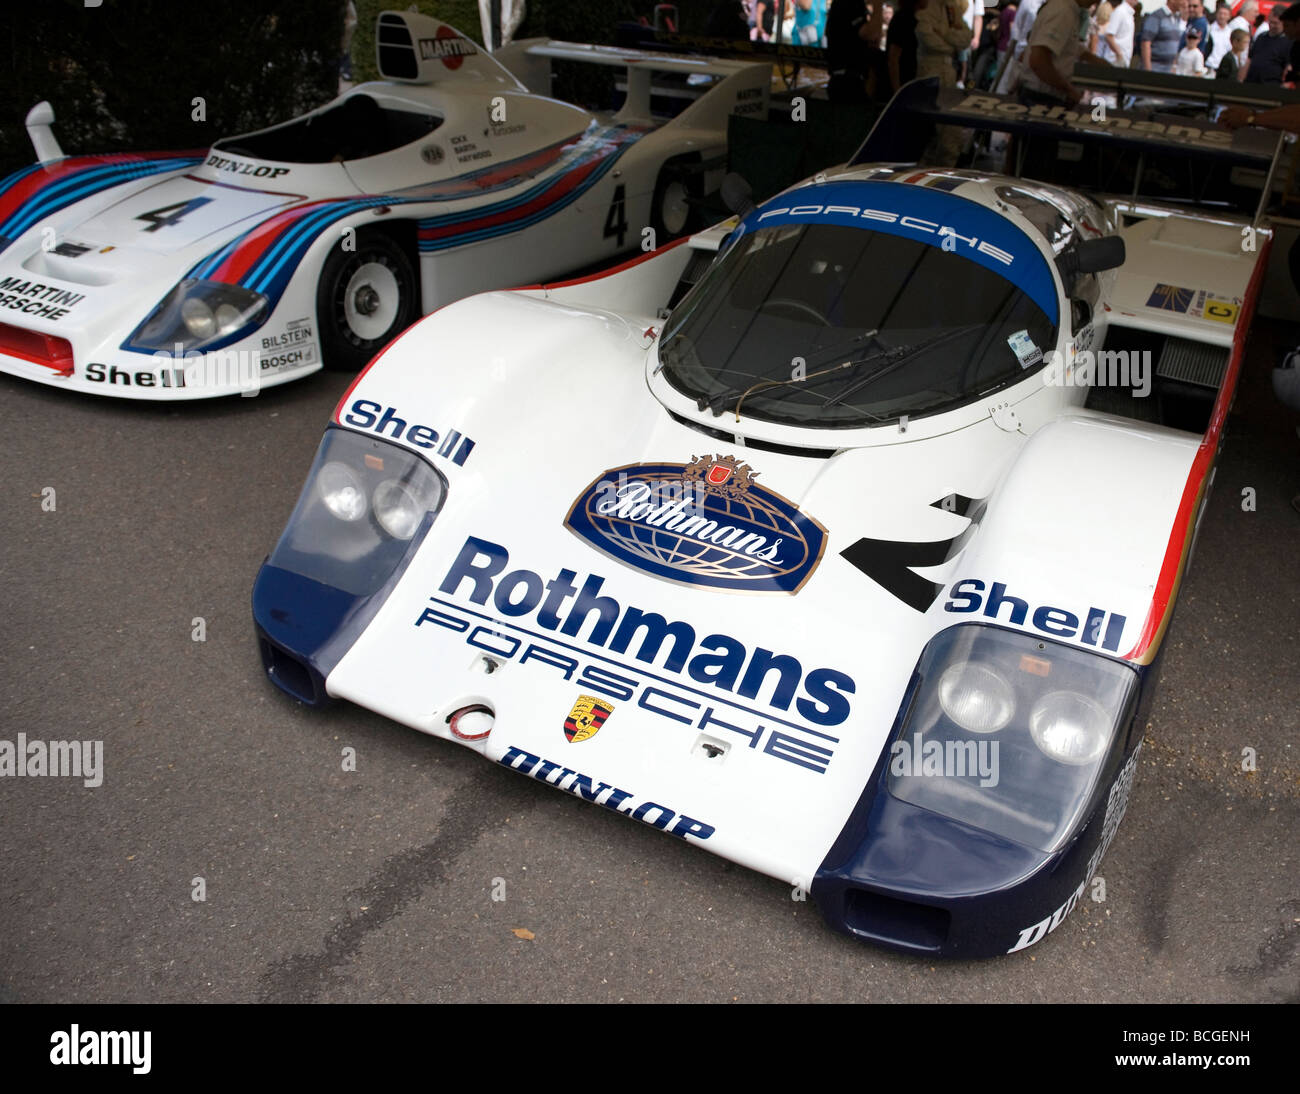 Rothmans liveried Porsche 962 Le Mans Racer at Goodwood Festival of Speed Stock Photo